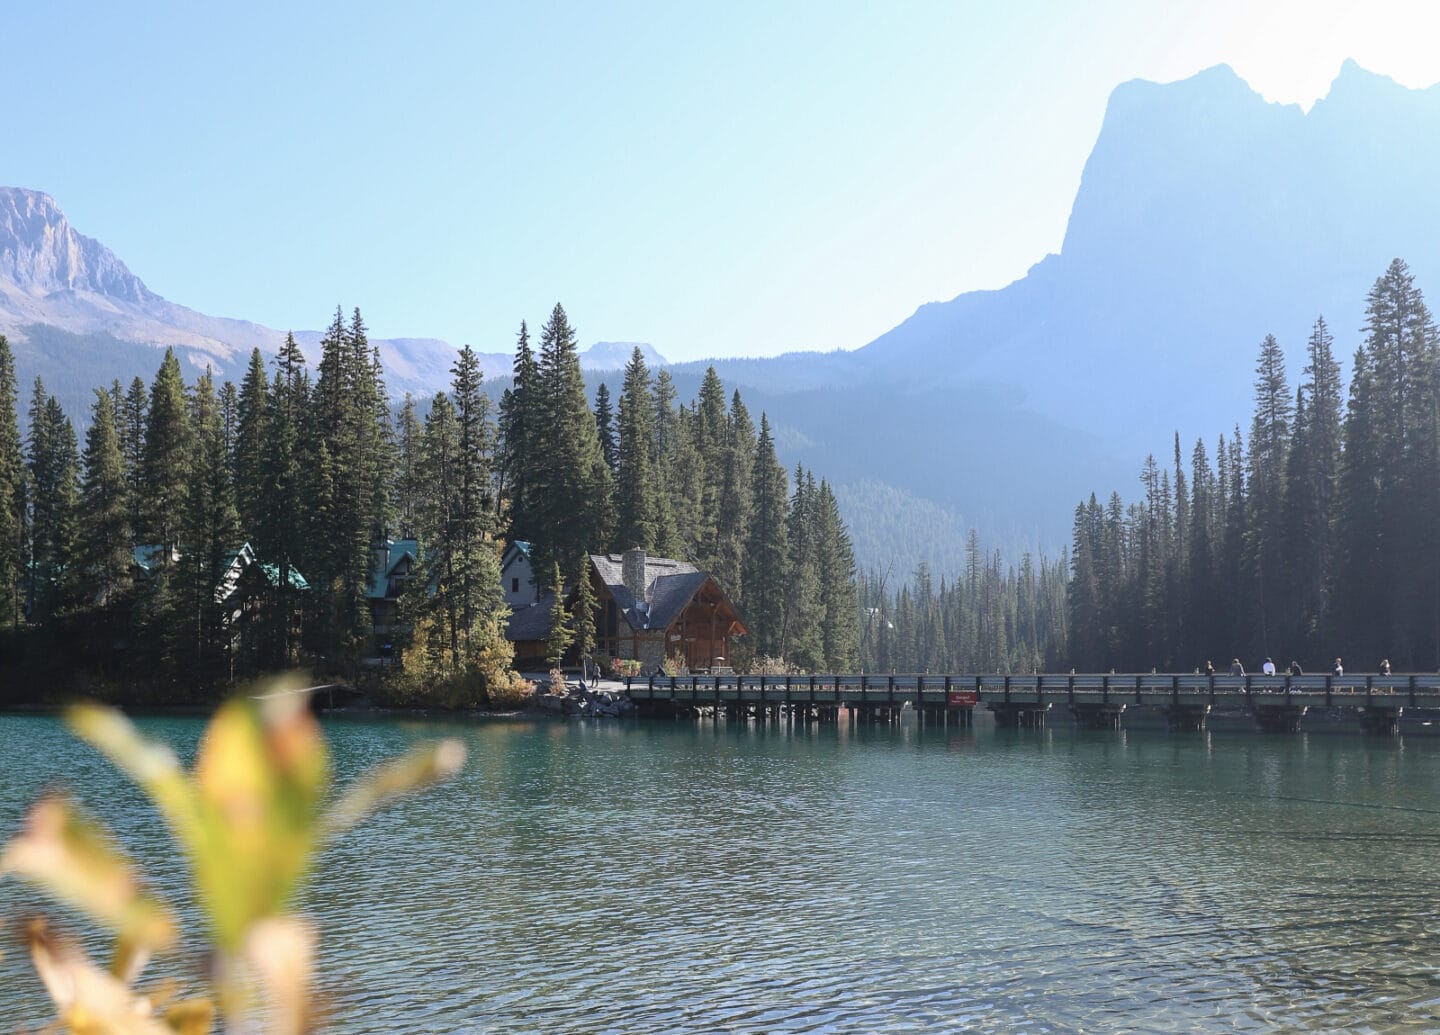 How to get around Banff and Jasper without a car